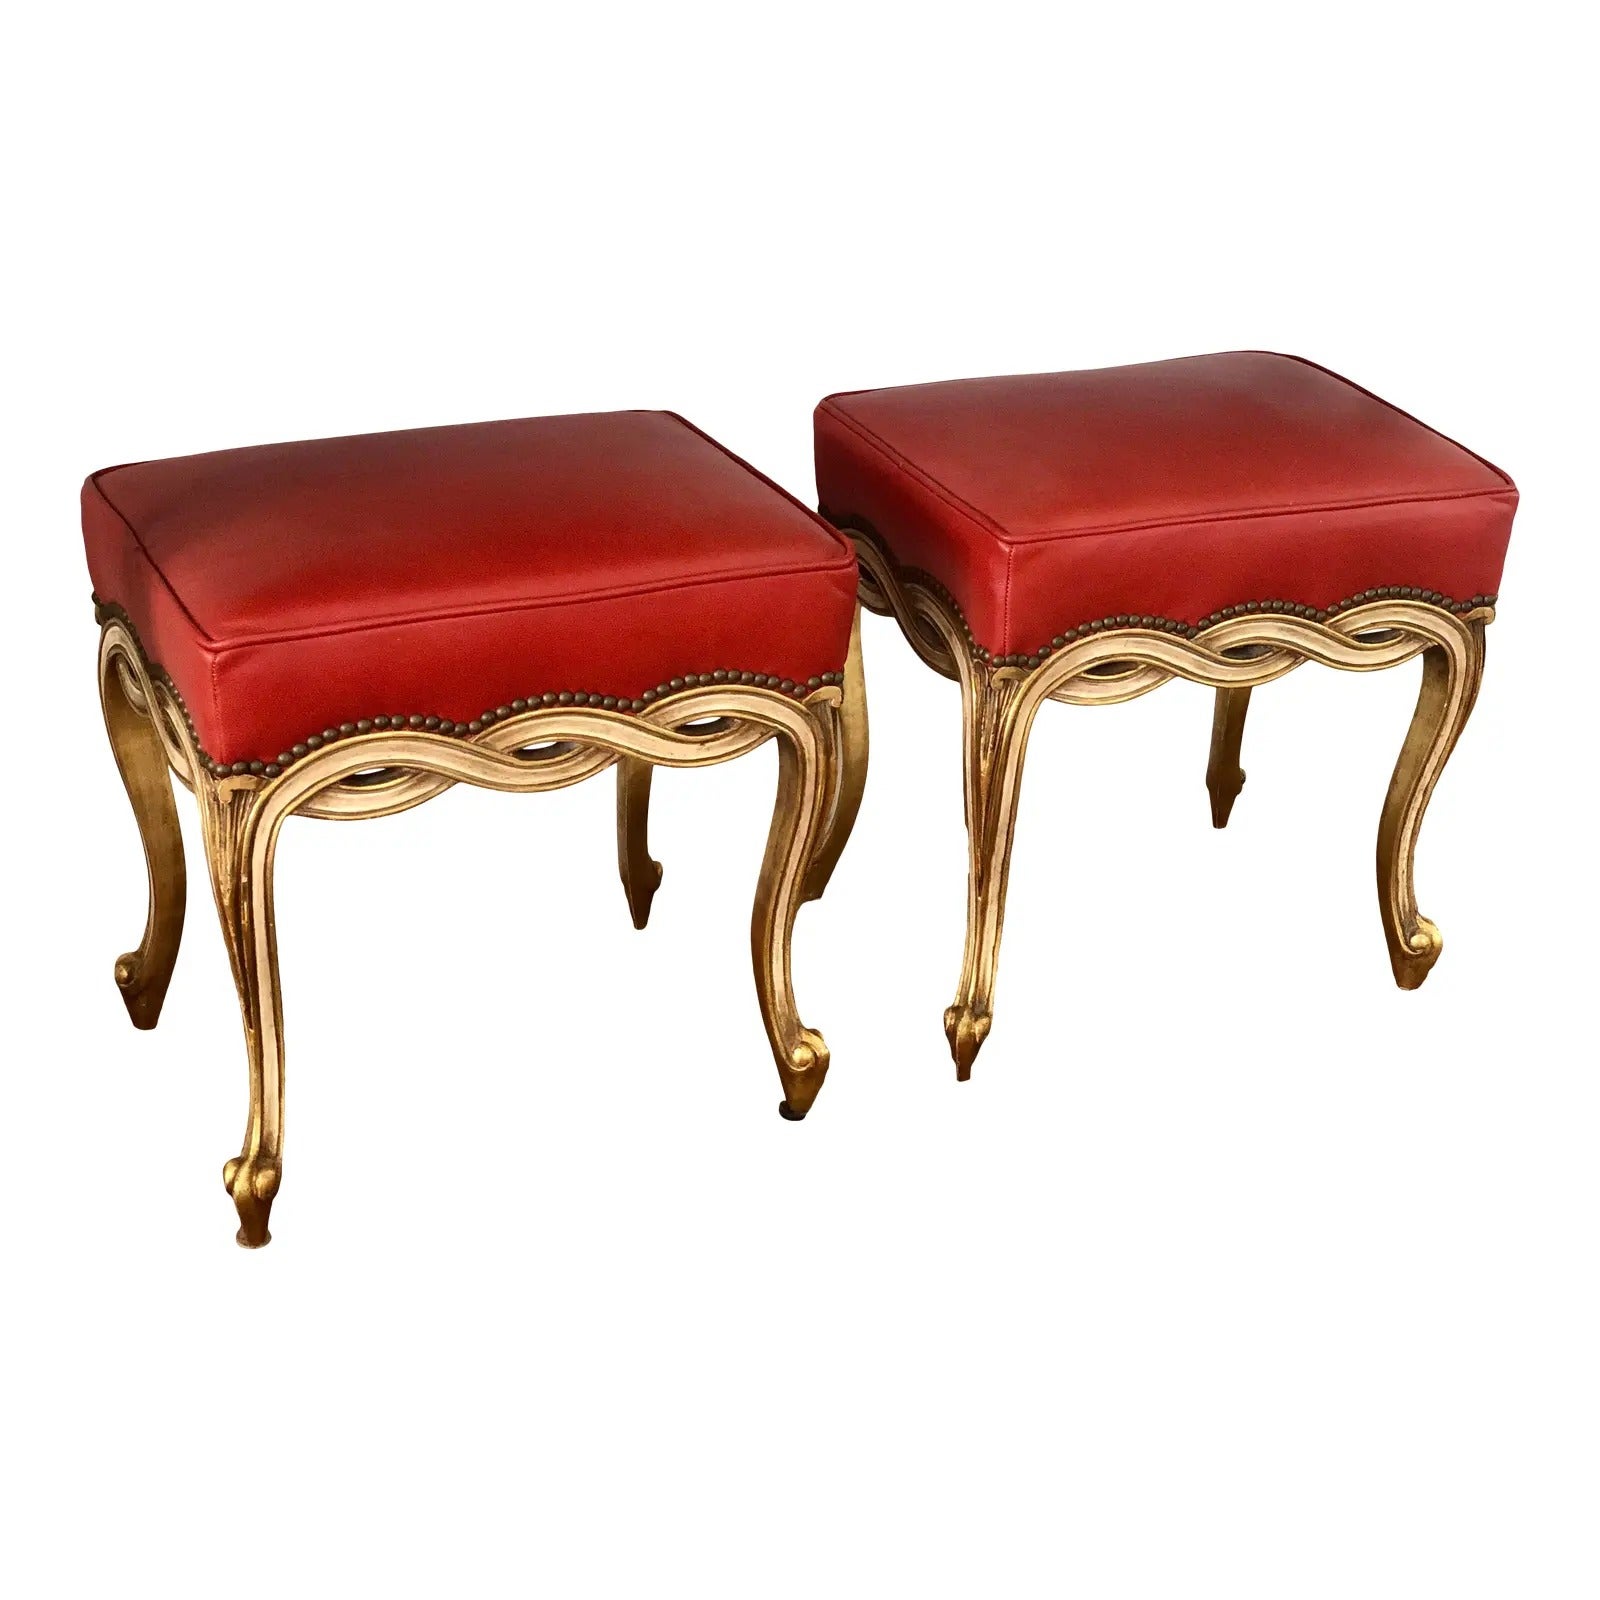 Pair of Regency Style Giltwood Taboret Benches by Randy Esada Designs for Prospr For Sale